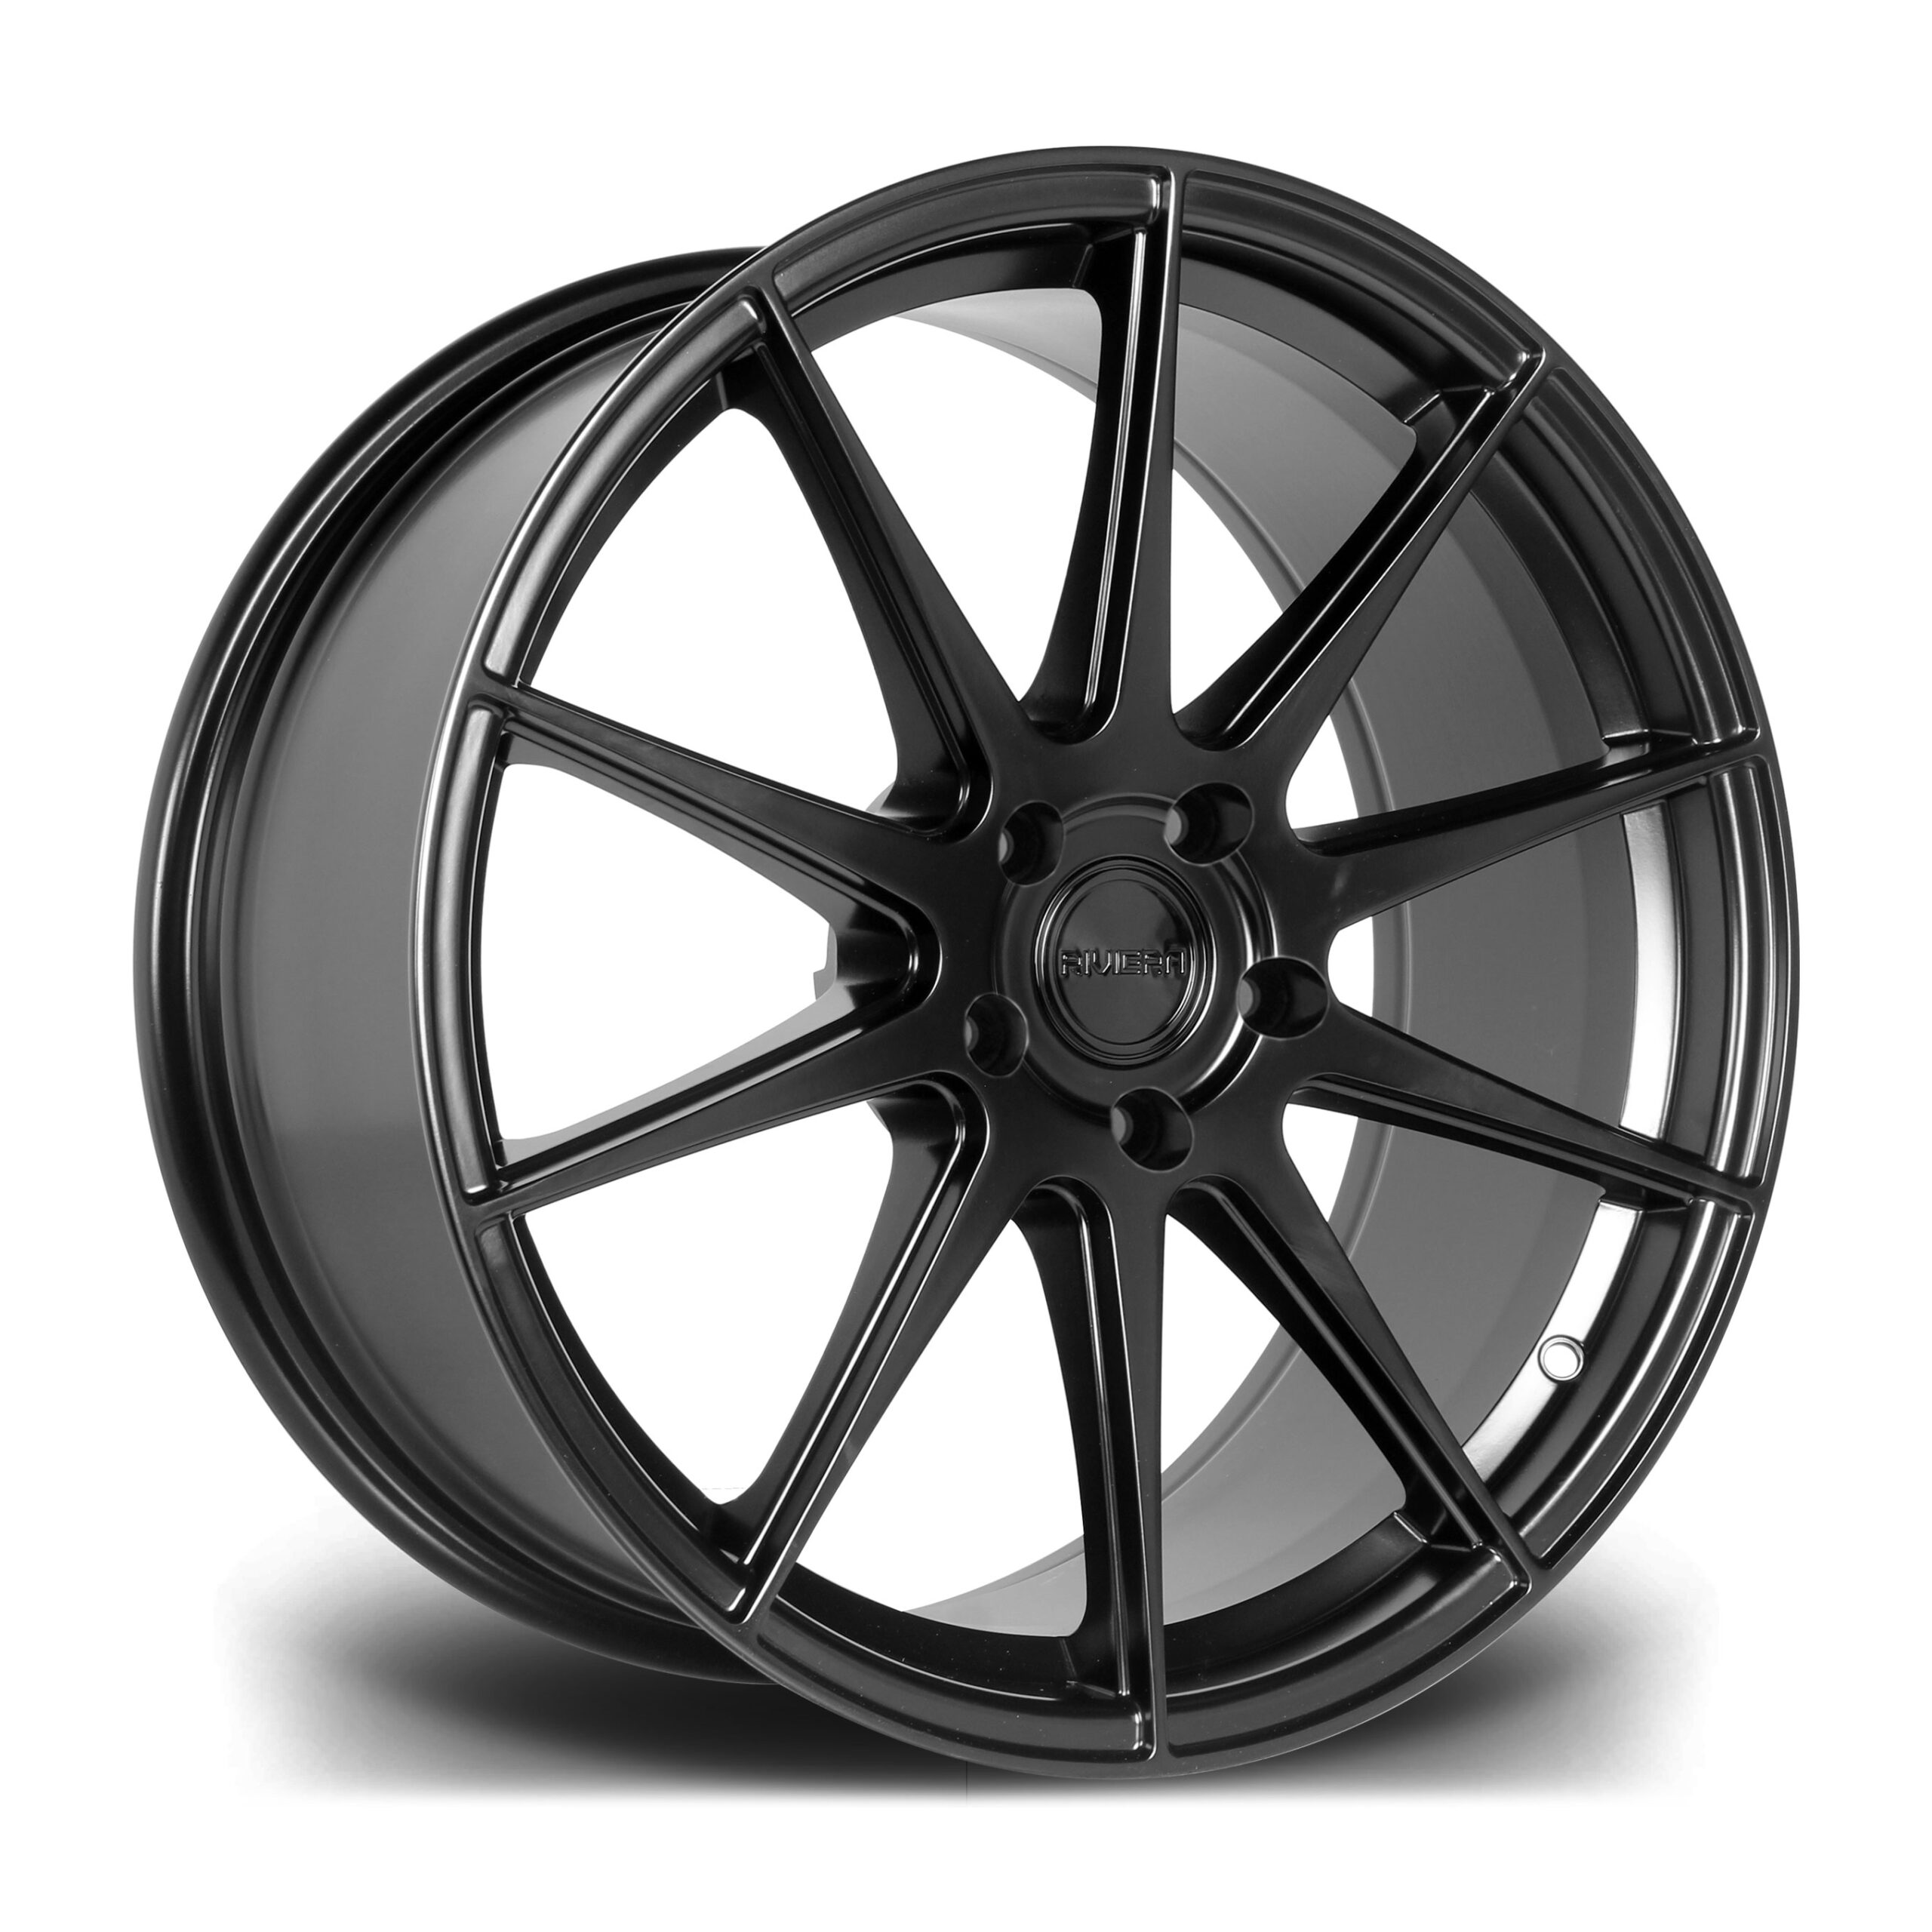 19 Inch Riviera RV194 Alloy Wheels + Change of Colour To Gloss Black Includes Transferal of Tyres To New Wheels